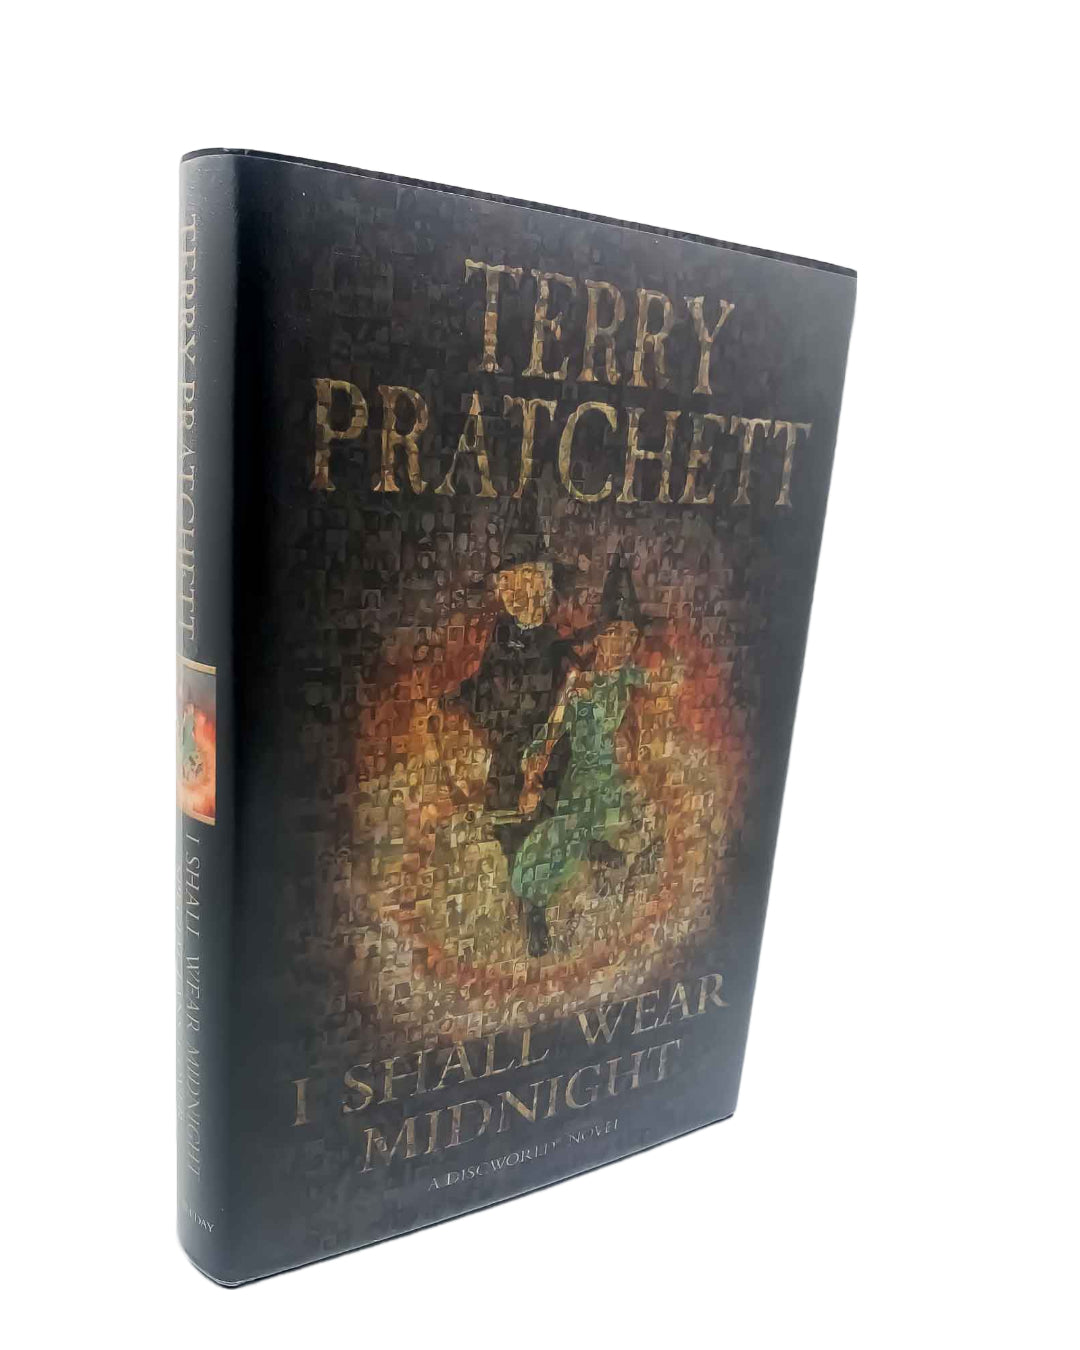 Pratchett, Terry - I Shall Wear Midnight - special fan's cover  - SIGNED